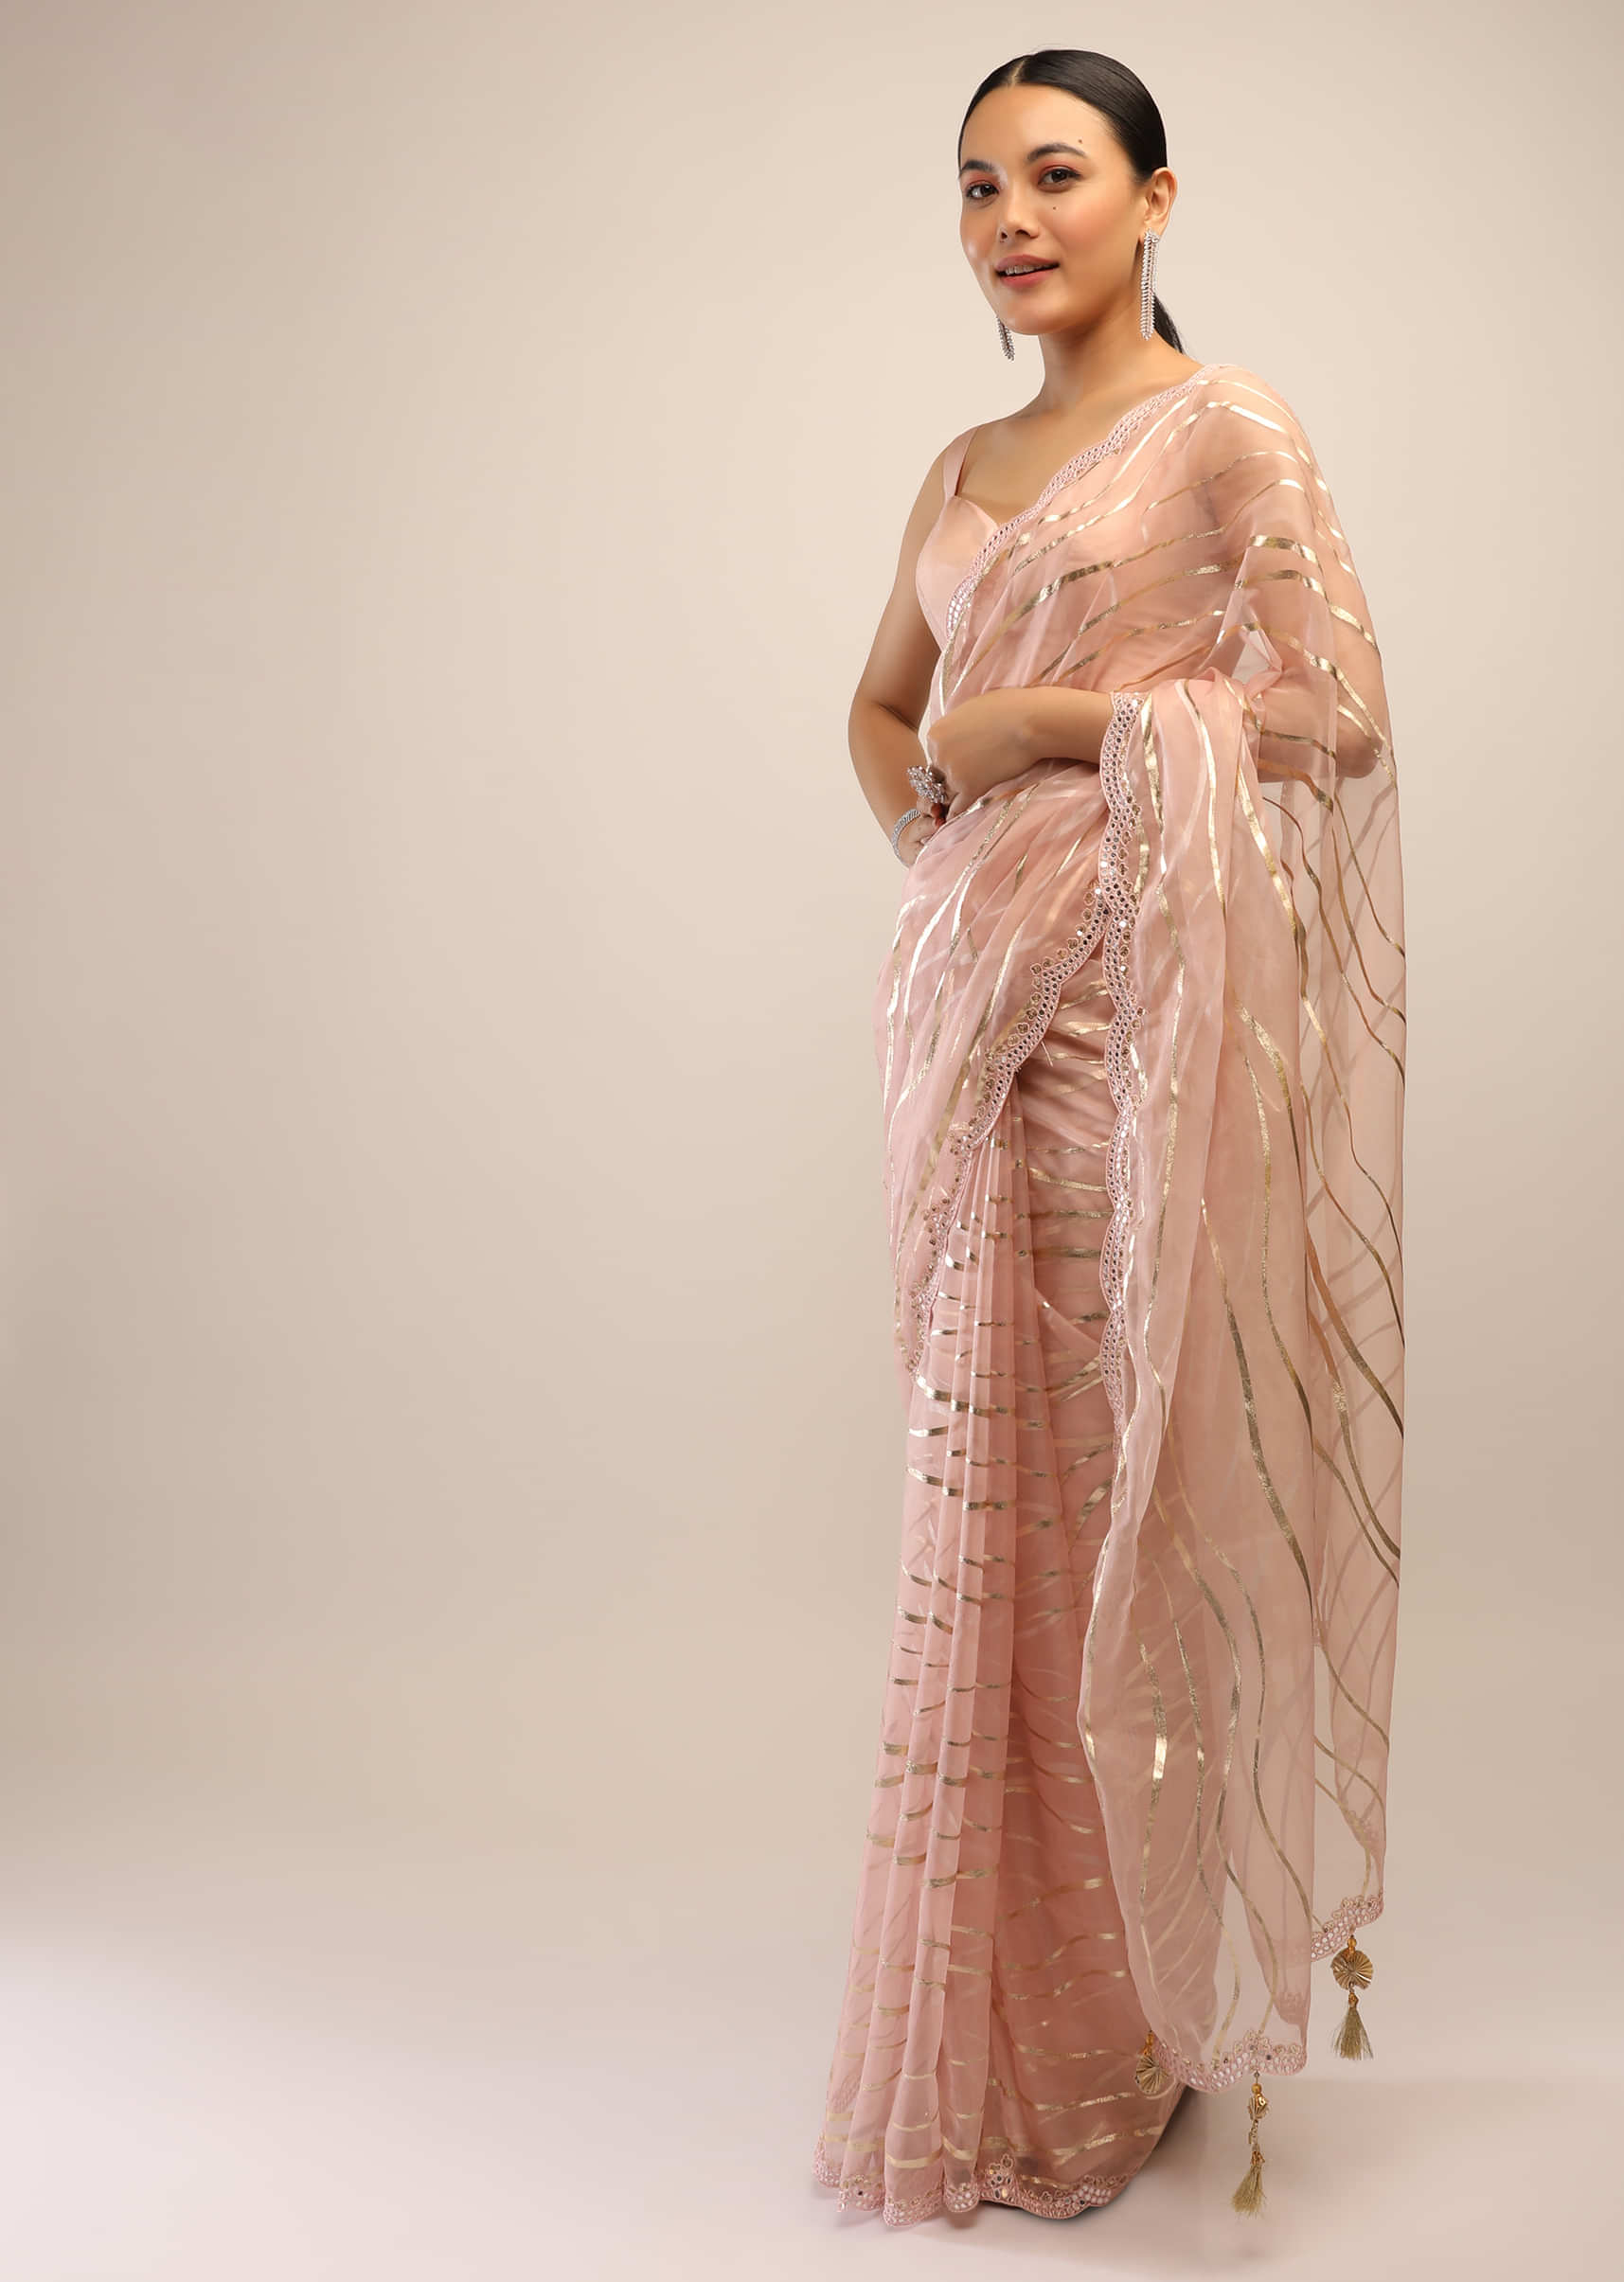 Powder Peach Saree In Organza With Foil Printed Scattered Dots And Mirror Embroidered Scallop Border